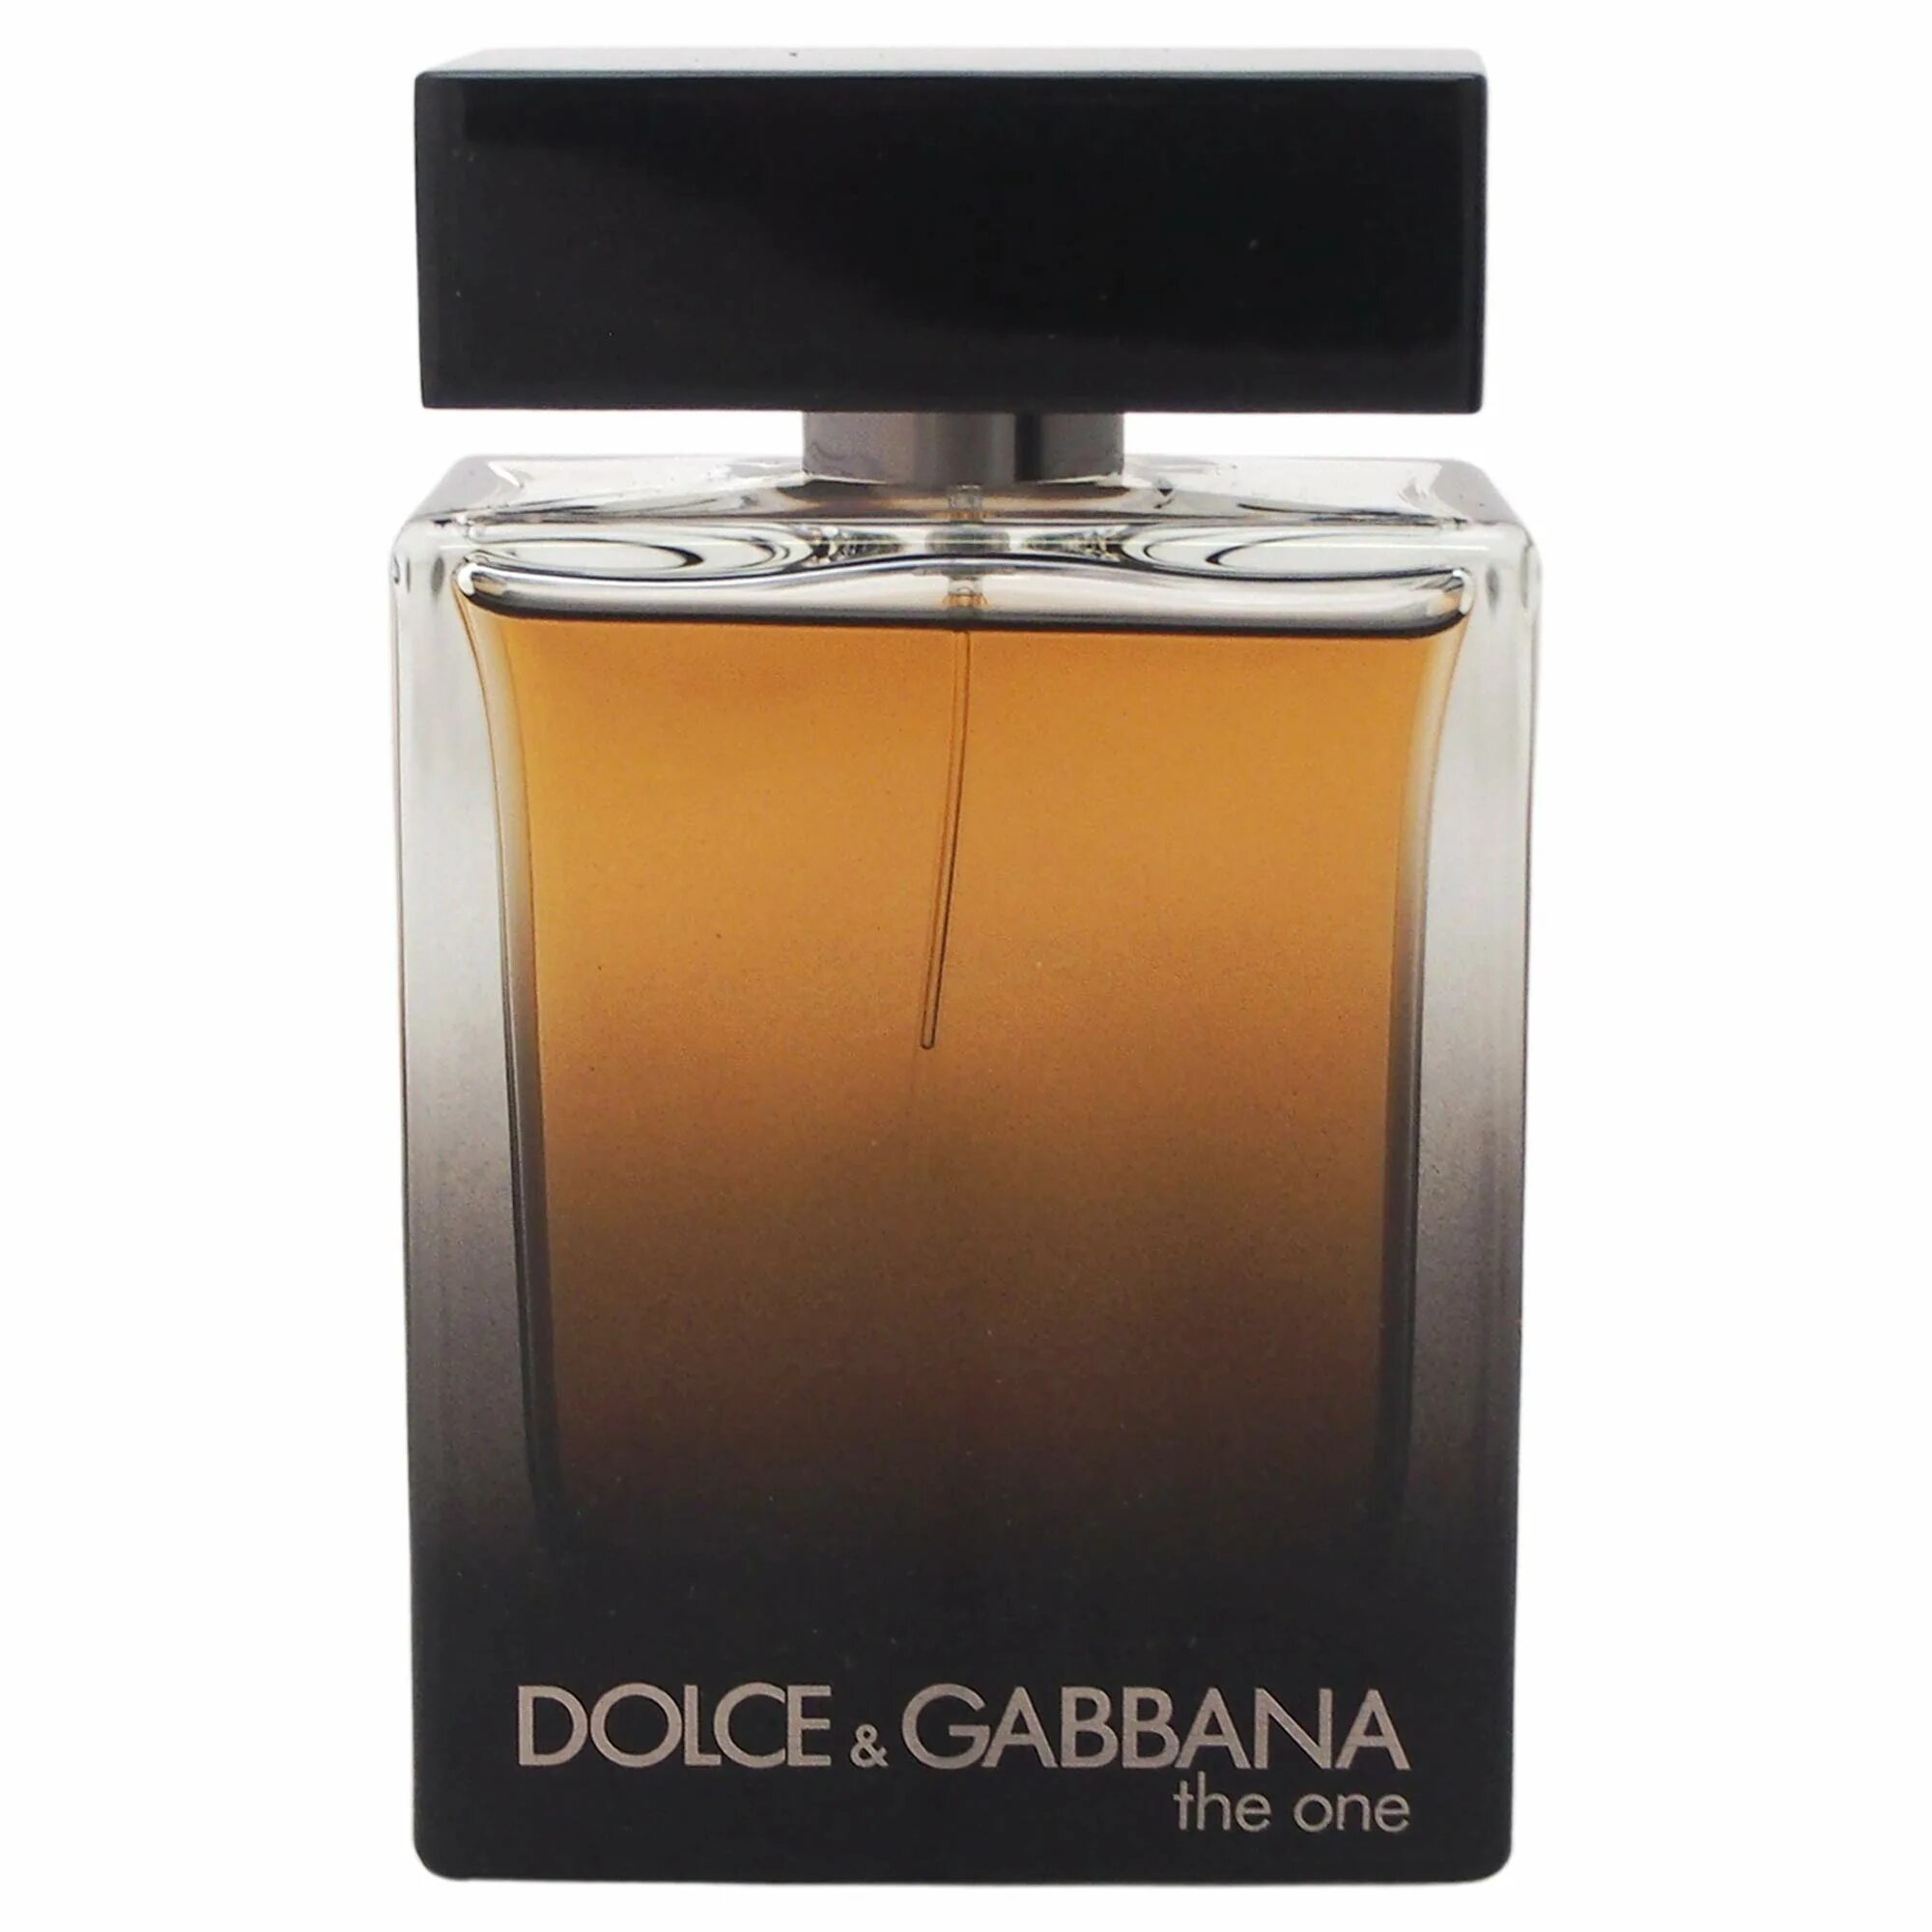 Dolce Gabbana the one for men 100 мл. Dolce Gabbana the one 100ml. Dolce Gabbana the one 100ml мужские. Dolce Gabbana the one for men Eau de Parfum.